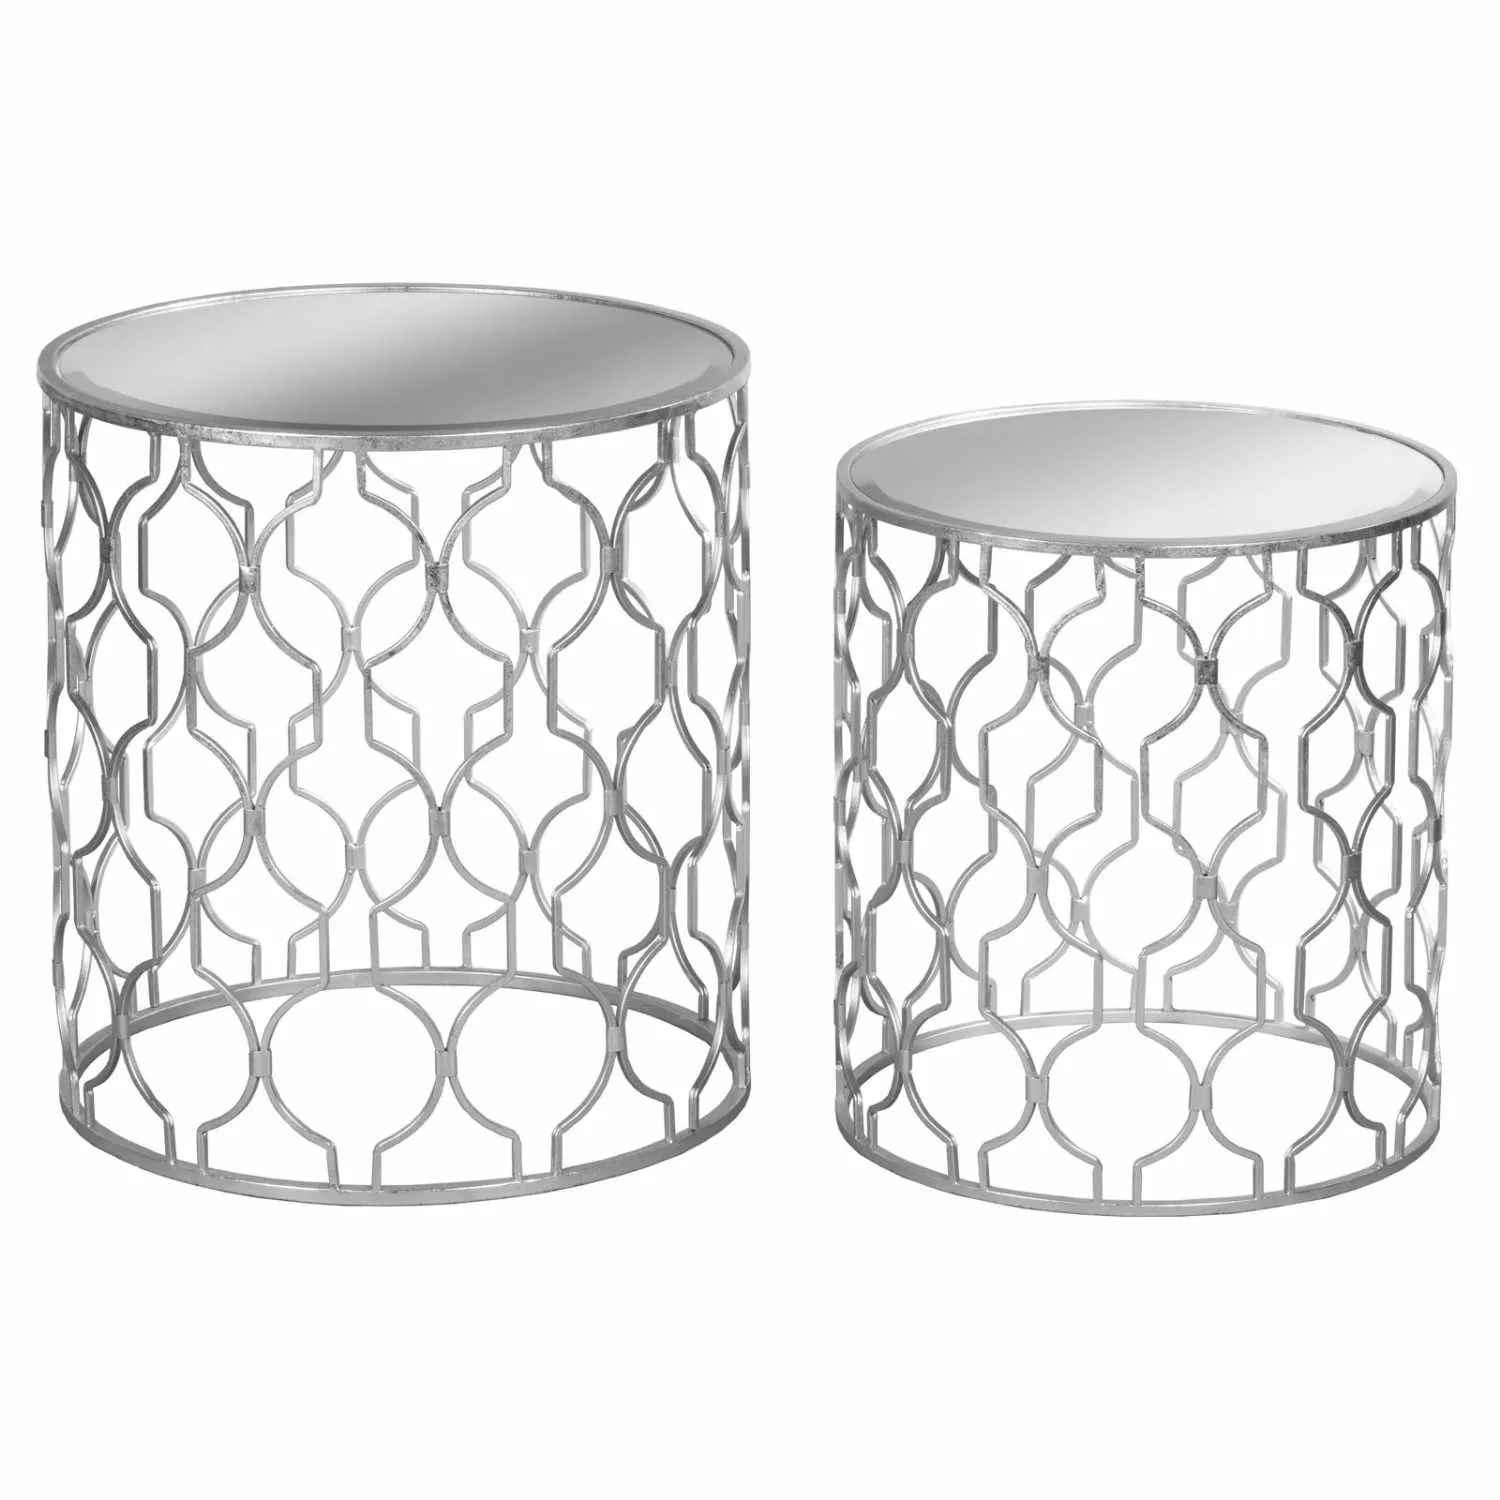 Set of 2 Arabesque Silver Foil Mirrored Glass Side Tables On Metal Bases